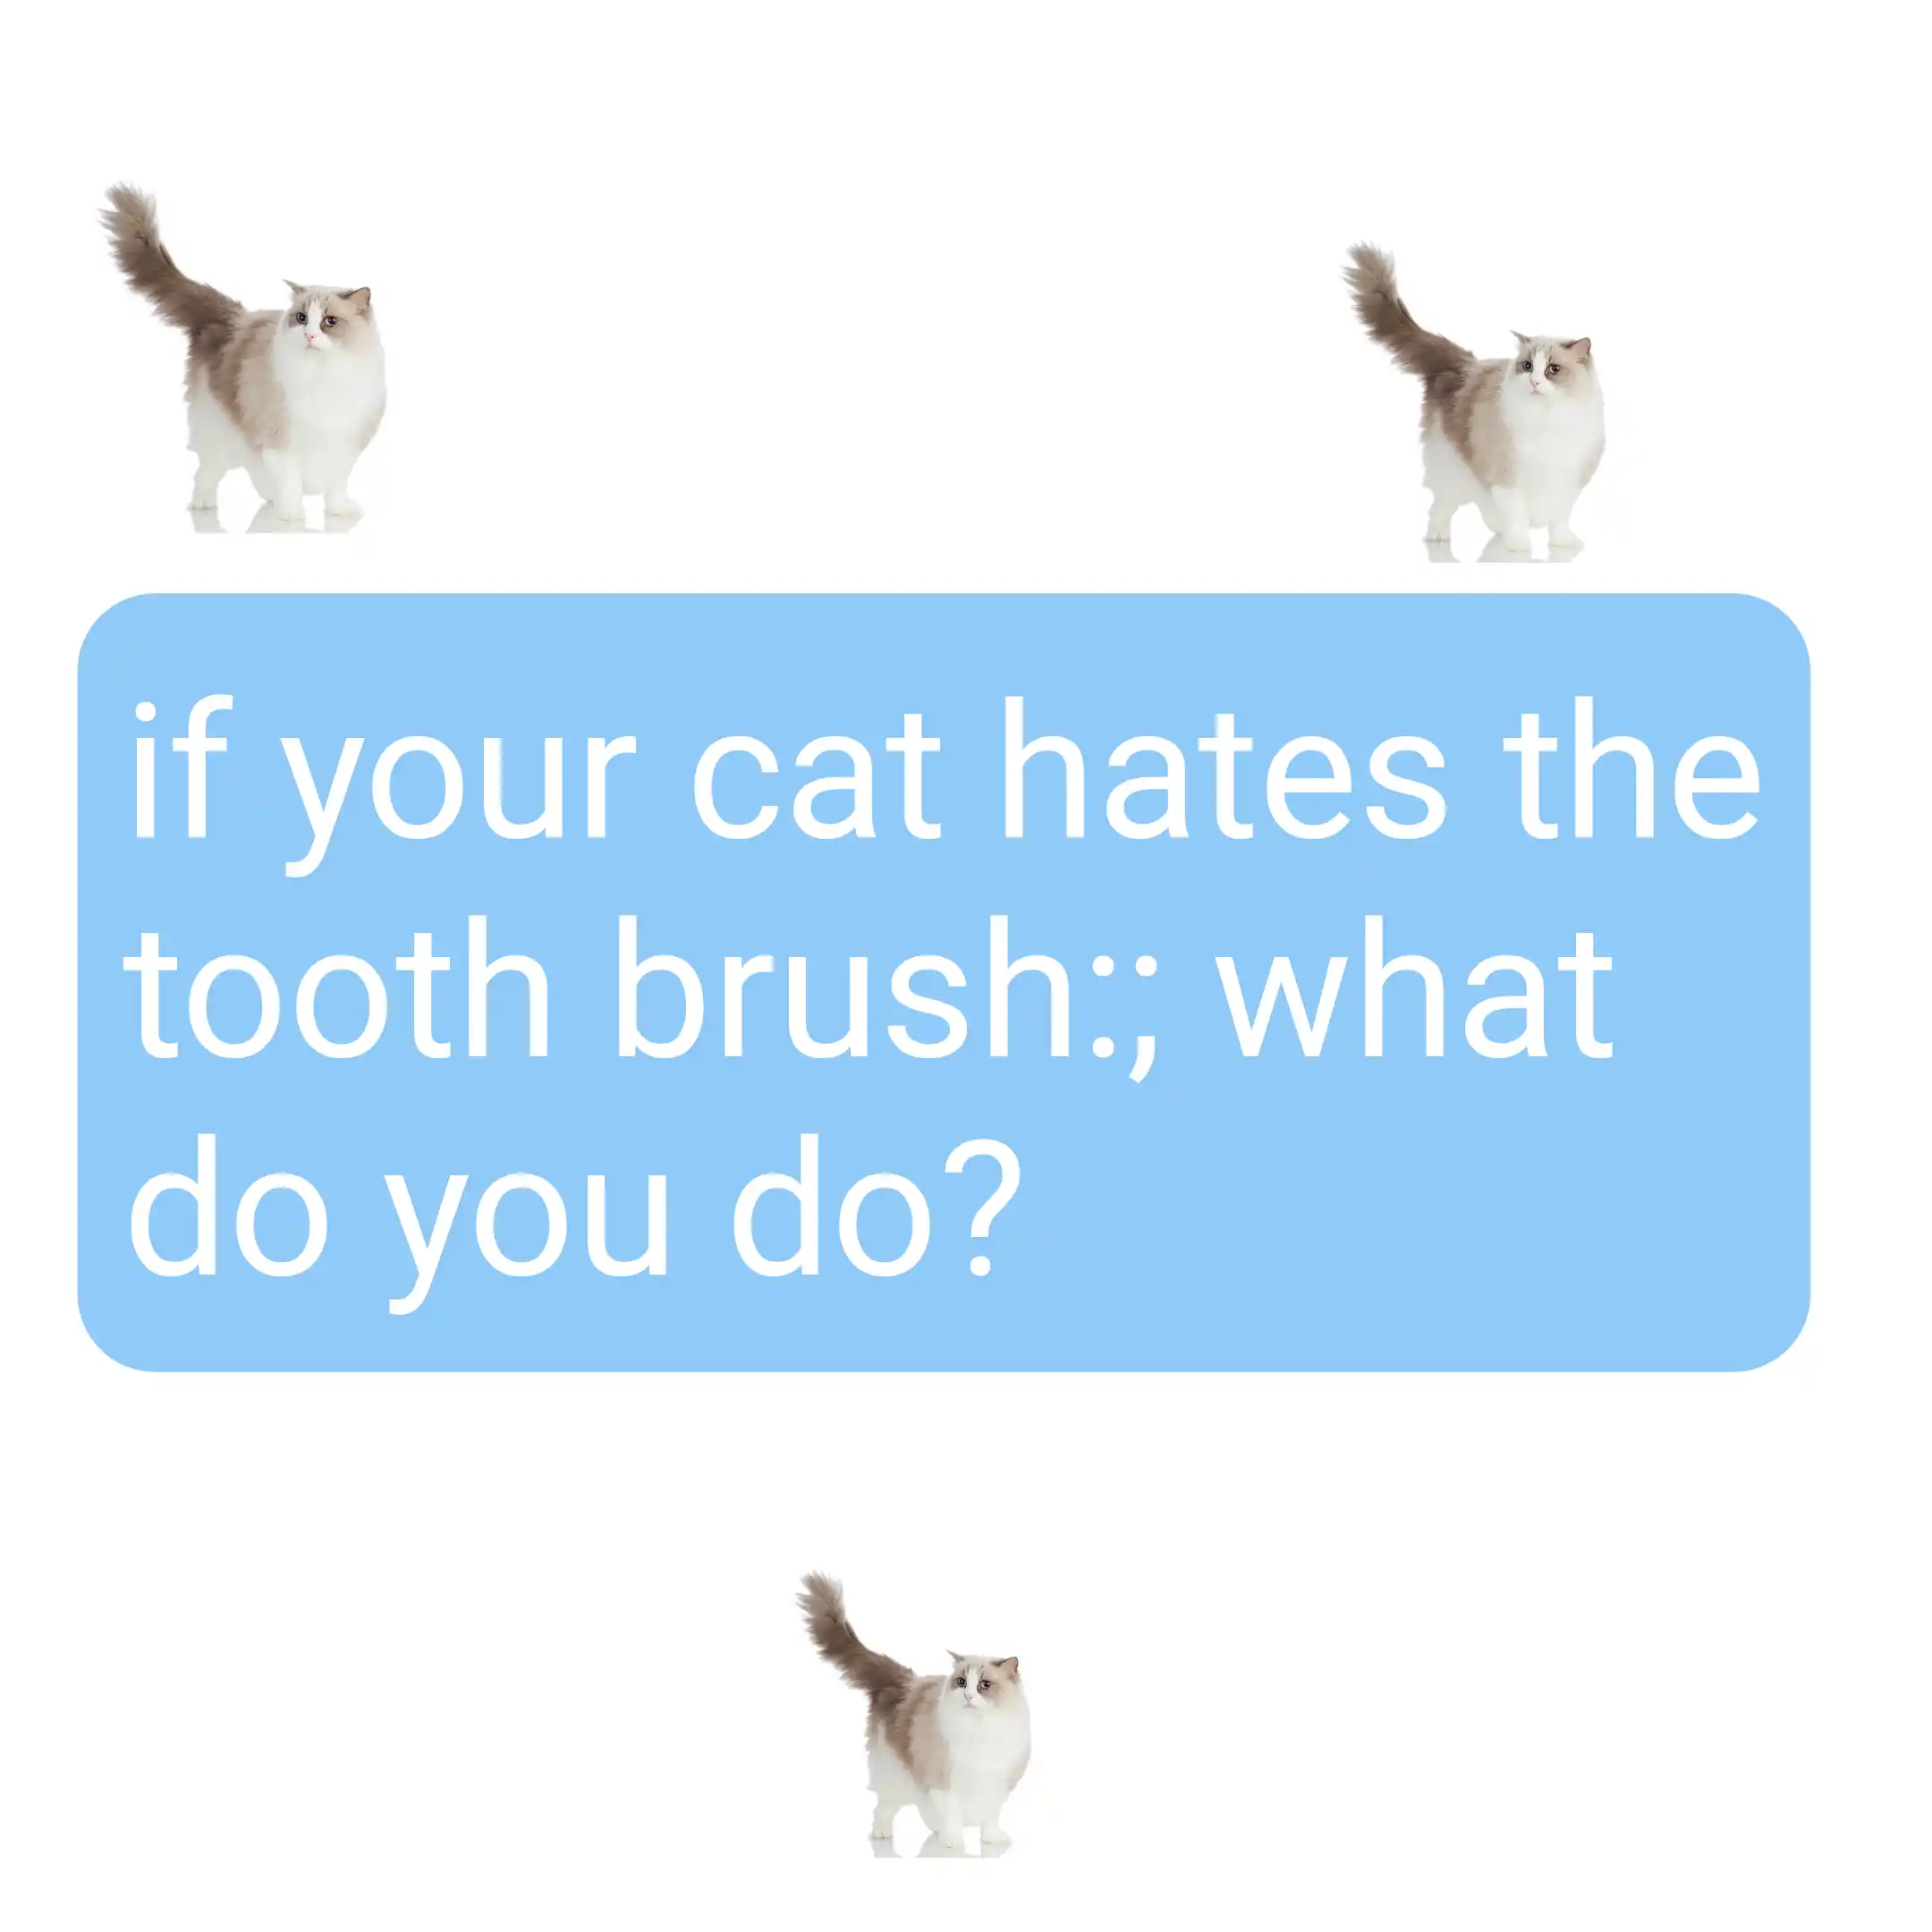 What To Do If Your Cat Hates The Tooth Brush